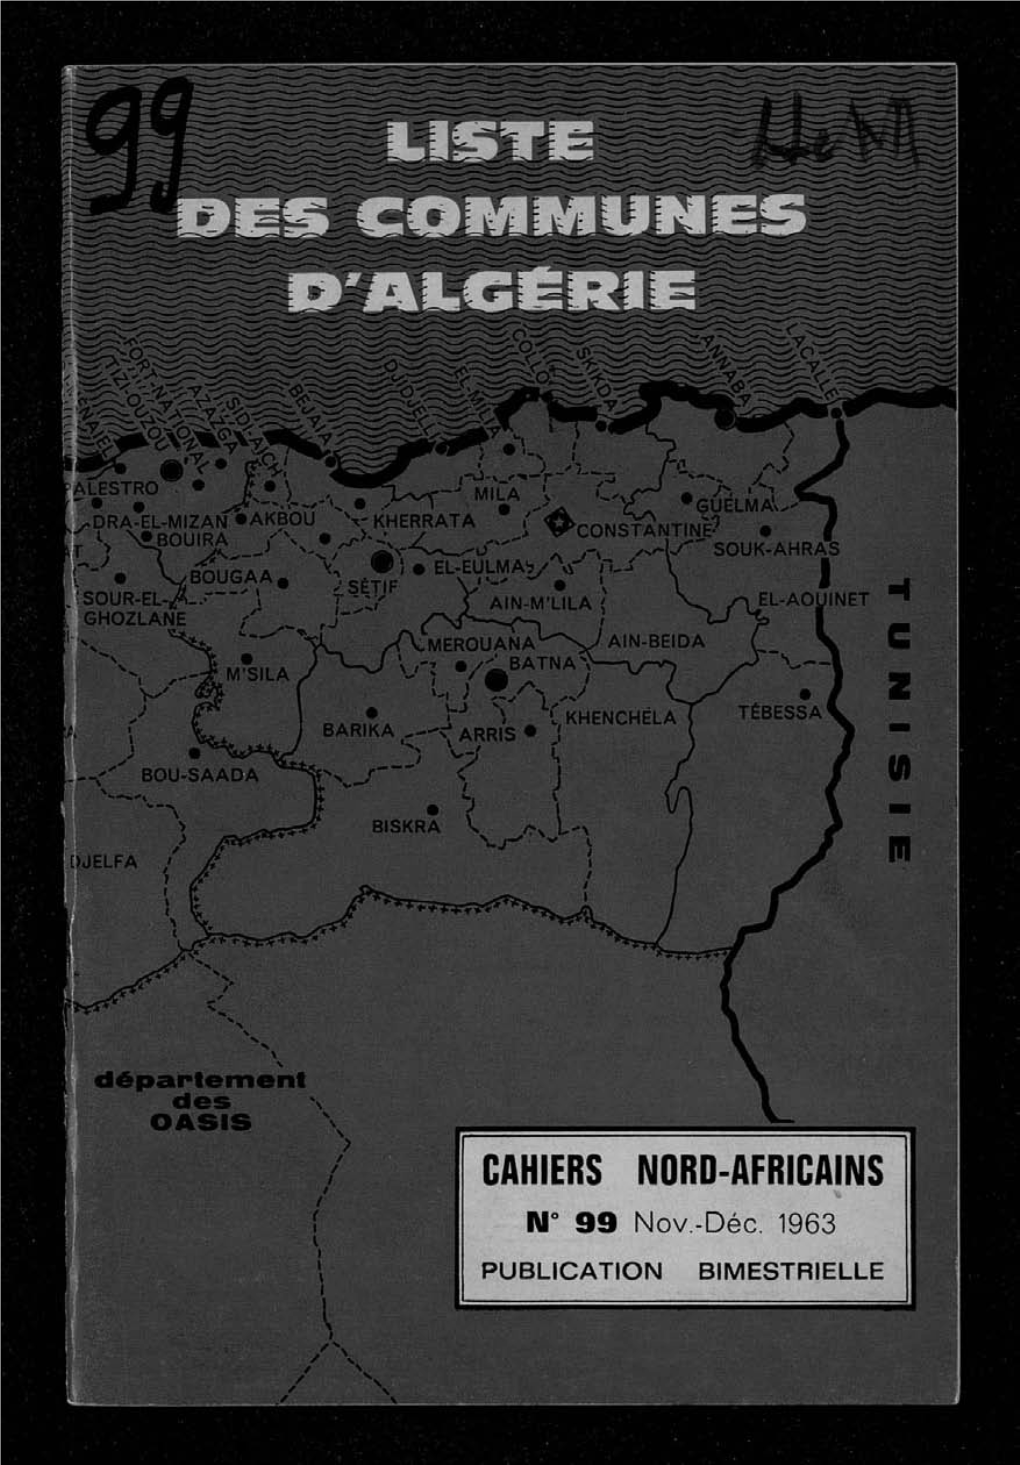 CAHIERS NORD-AFRICAINS N° 99 Nov.-Déc